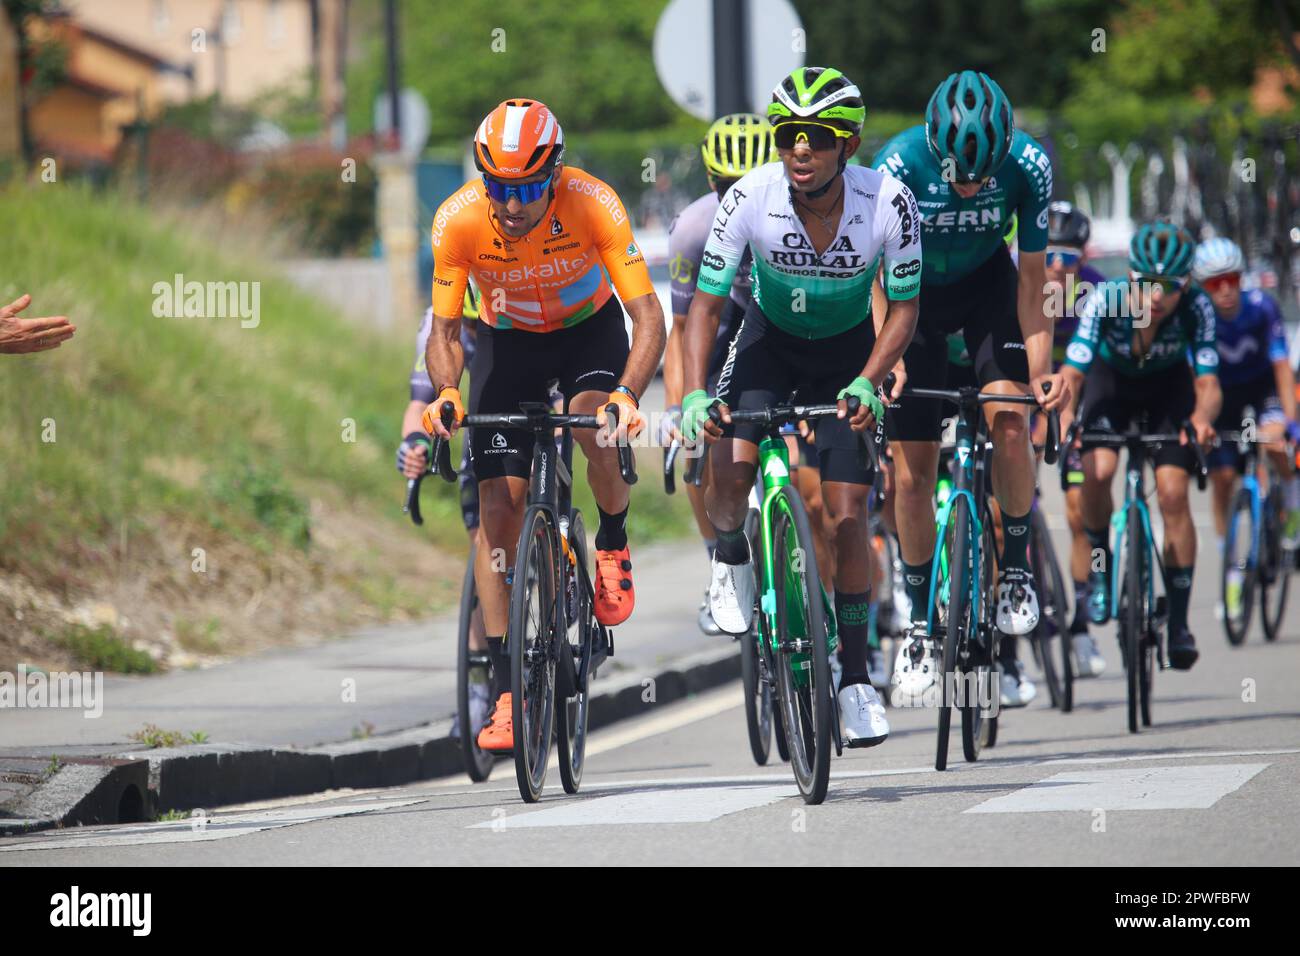 Oviedo, Spain, 30th April, 2023: The escape led by Luis Angel Mate (Euskaltel - Euskadi, L) and Mulu Kinfe Hailemichael (Caja Rural - Seguros RGA, R) during the 3rd stage of the Vuelta a Asturias 2023 between Cangas del Narcea and Oviedo, on April 30, 2023, in Oviedo, Spain. Credit: Alberto Brevers / Alamy Live News Stock Photo